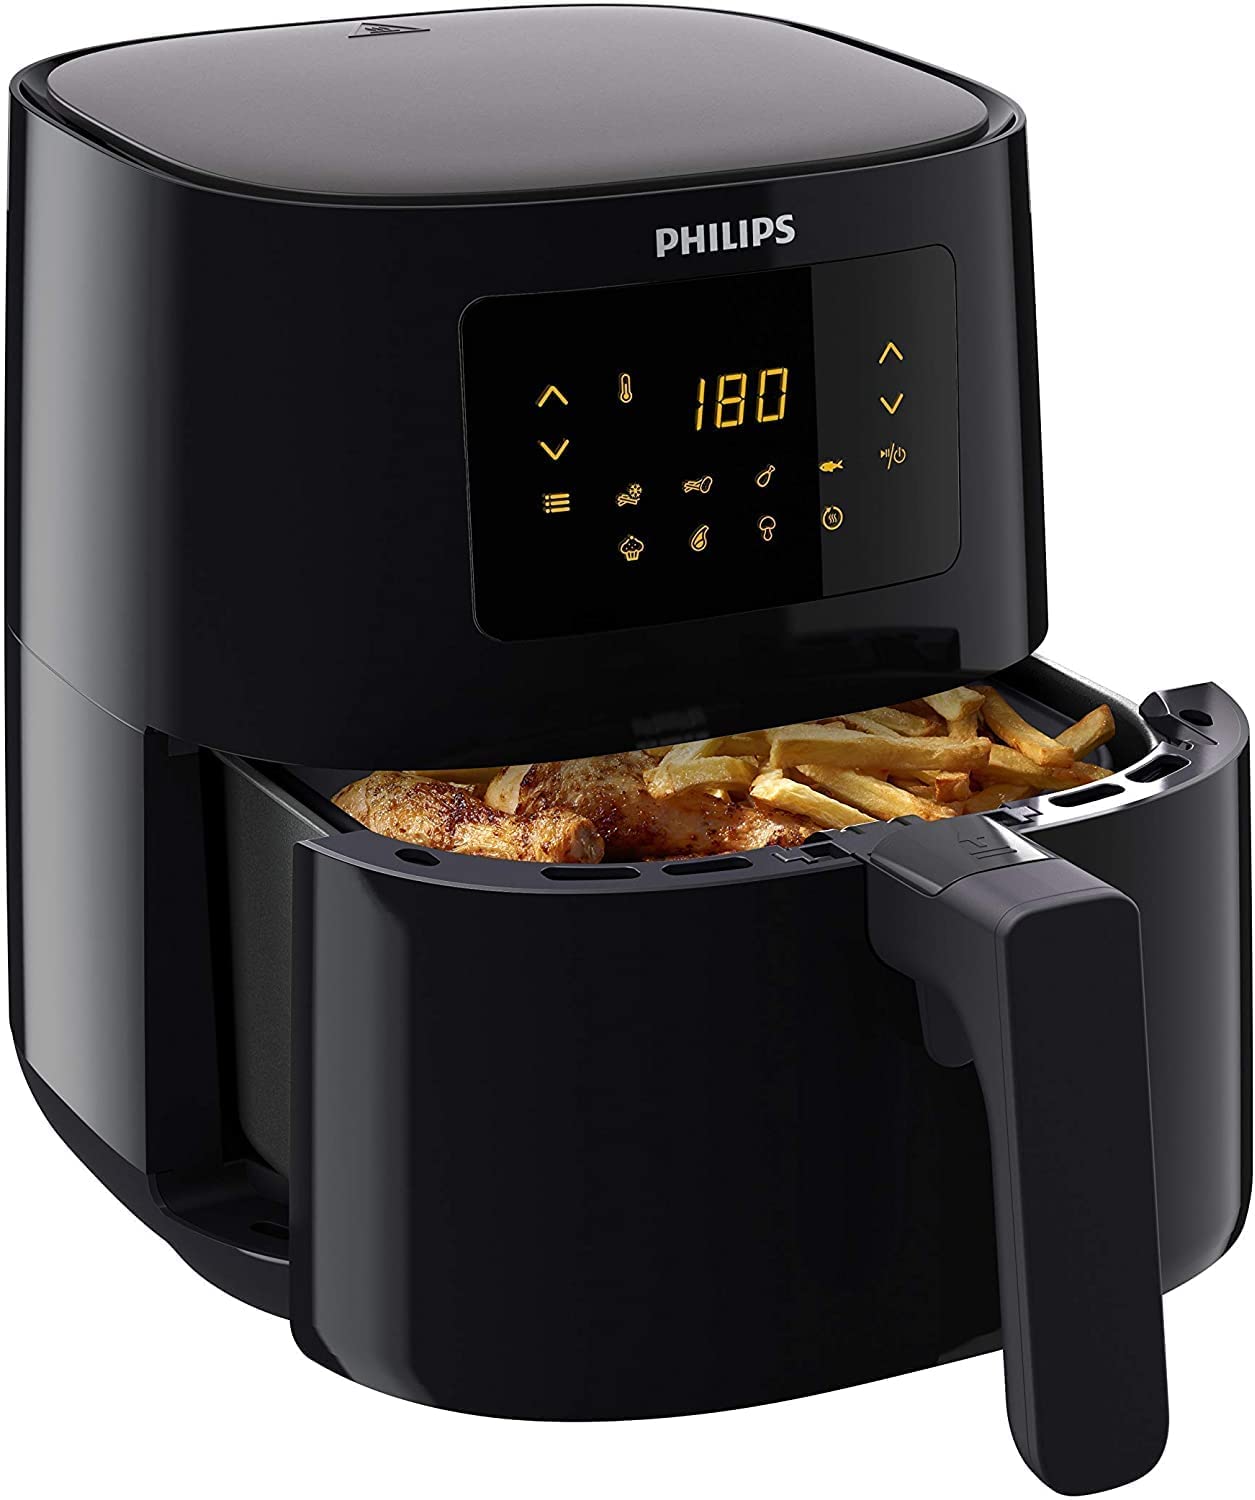 Philips Domestic Appliances Philips Airfryer